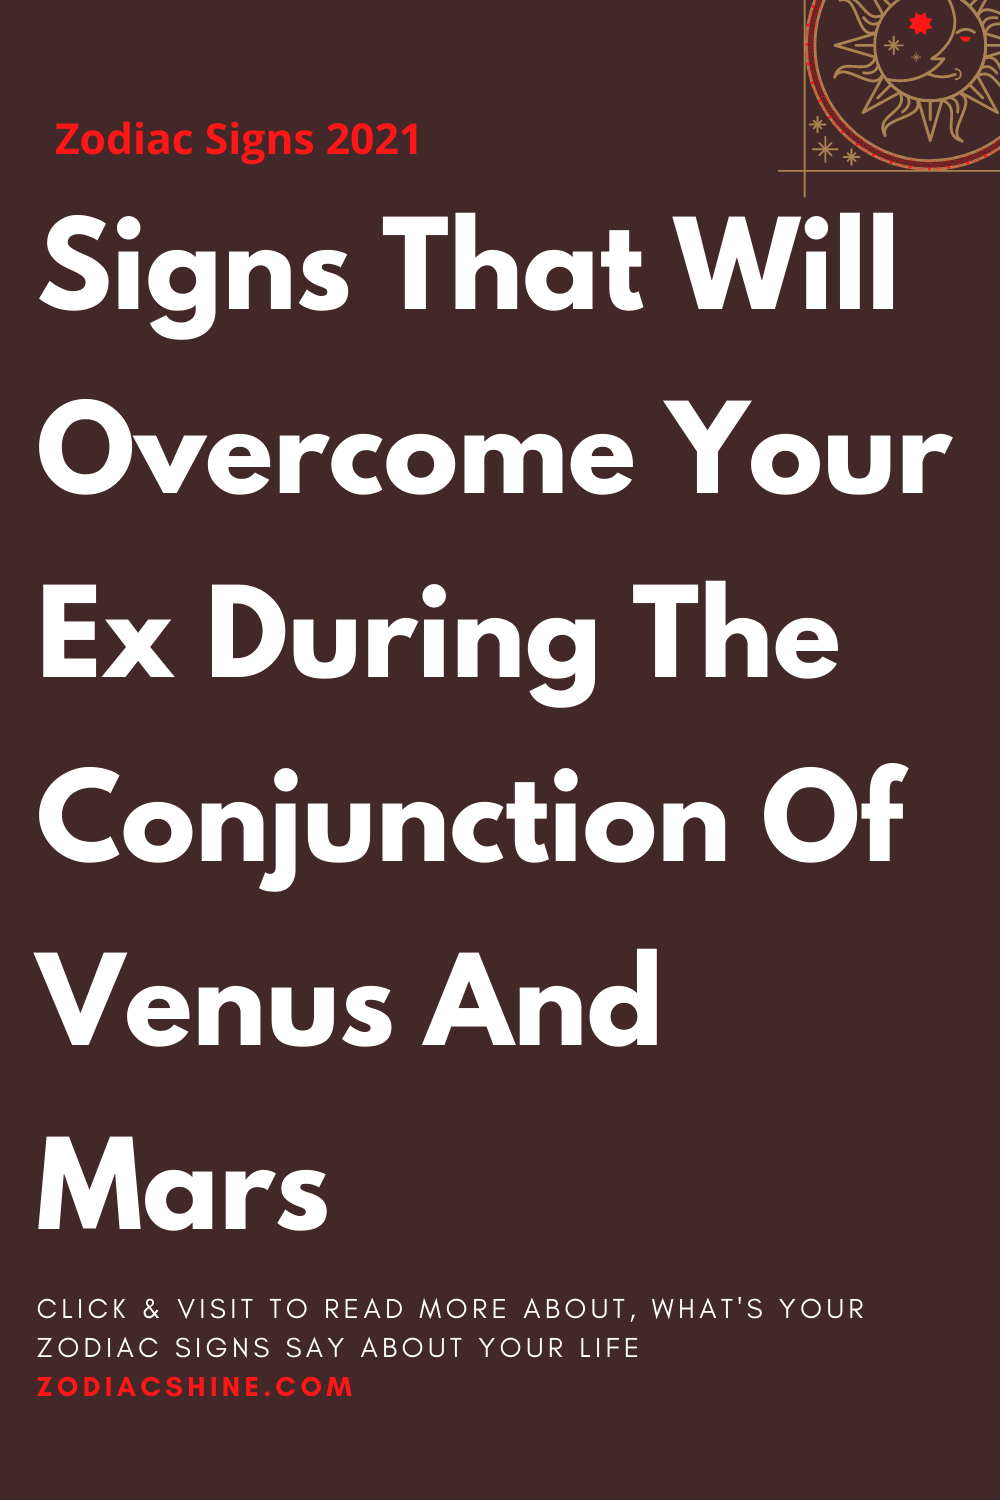 Signs That Will Overcome Your Ex During The Conjunction Of Venus And Mars